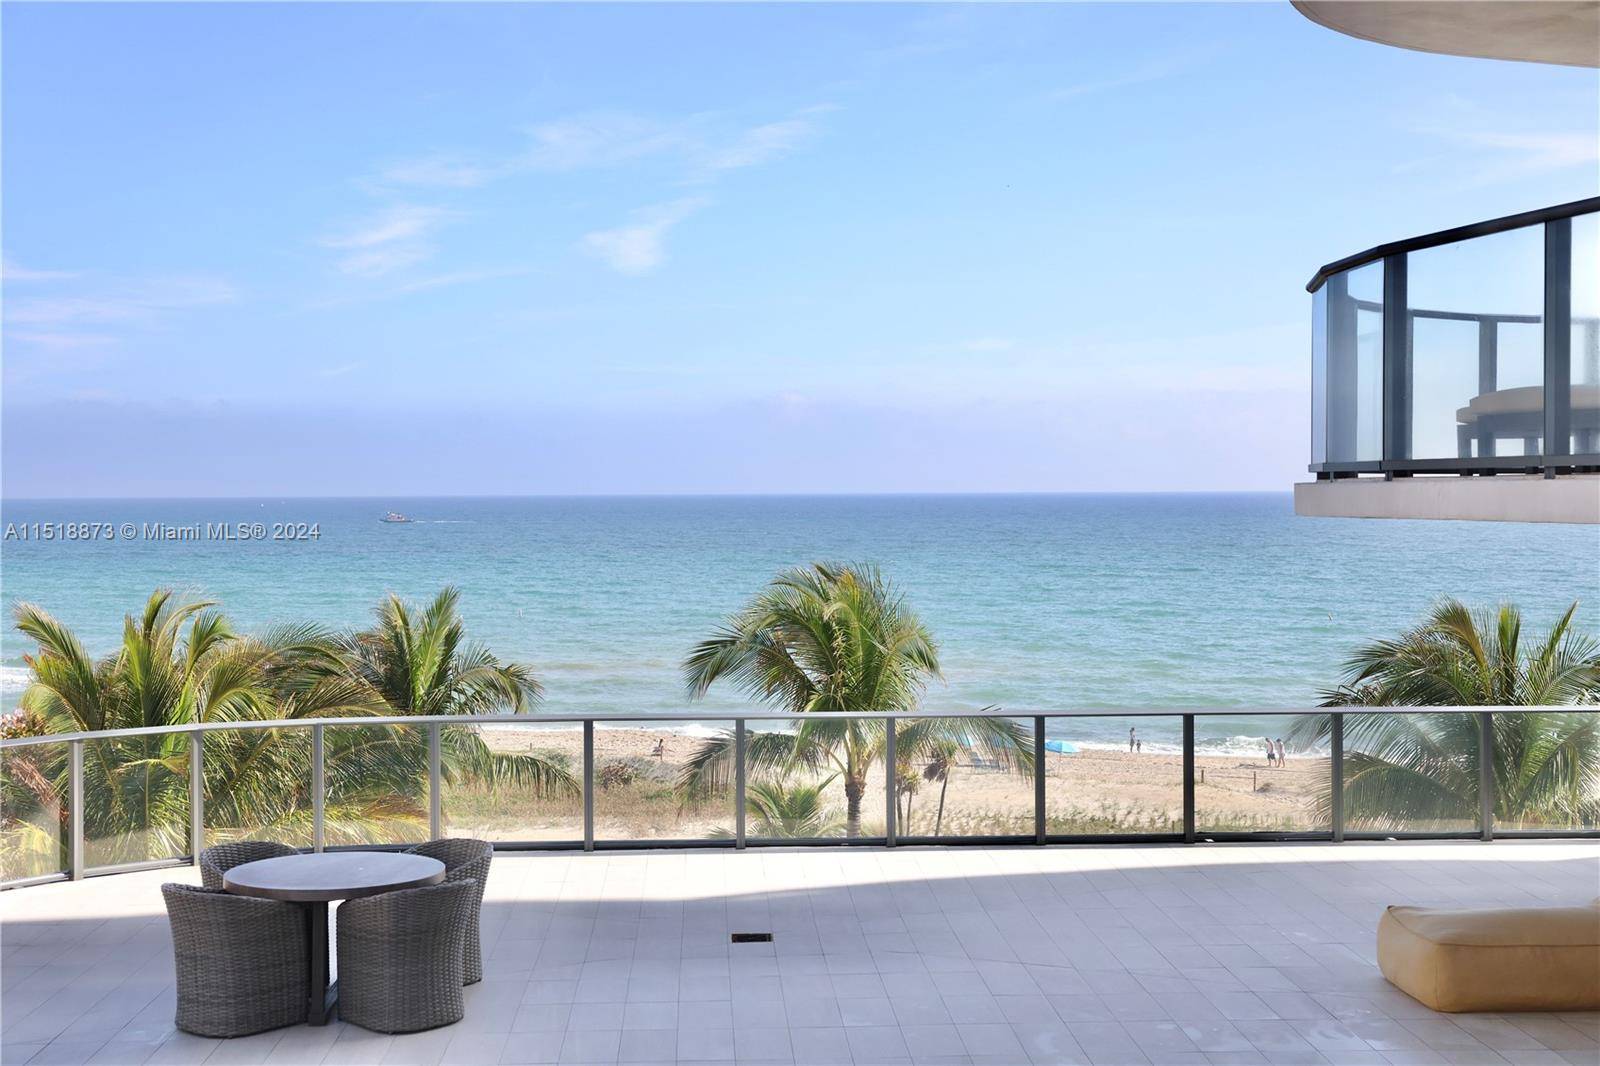 Discover this exclusive ocean front gem with an exceptionally oversized terrace of 3, 750 sq ft that wraps around the unit and offers incredible views of the ocean, the intracoastal, ...